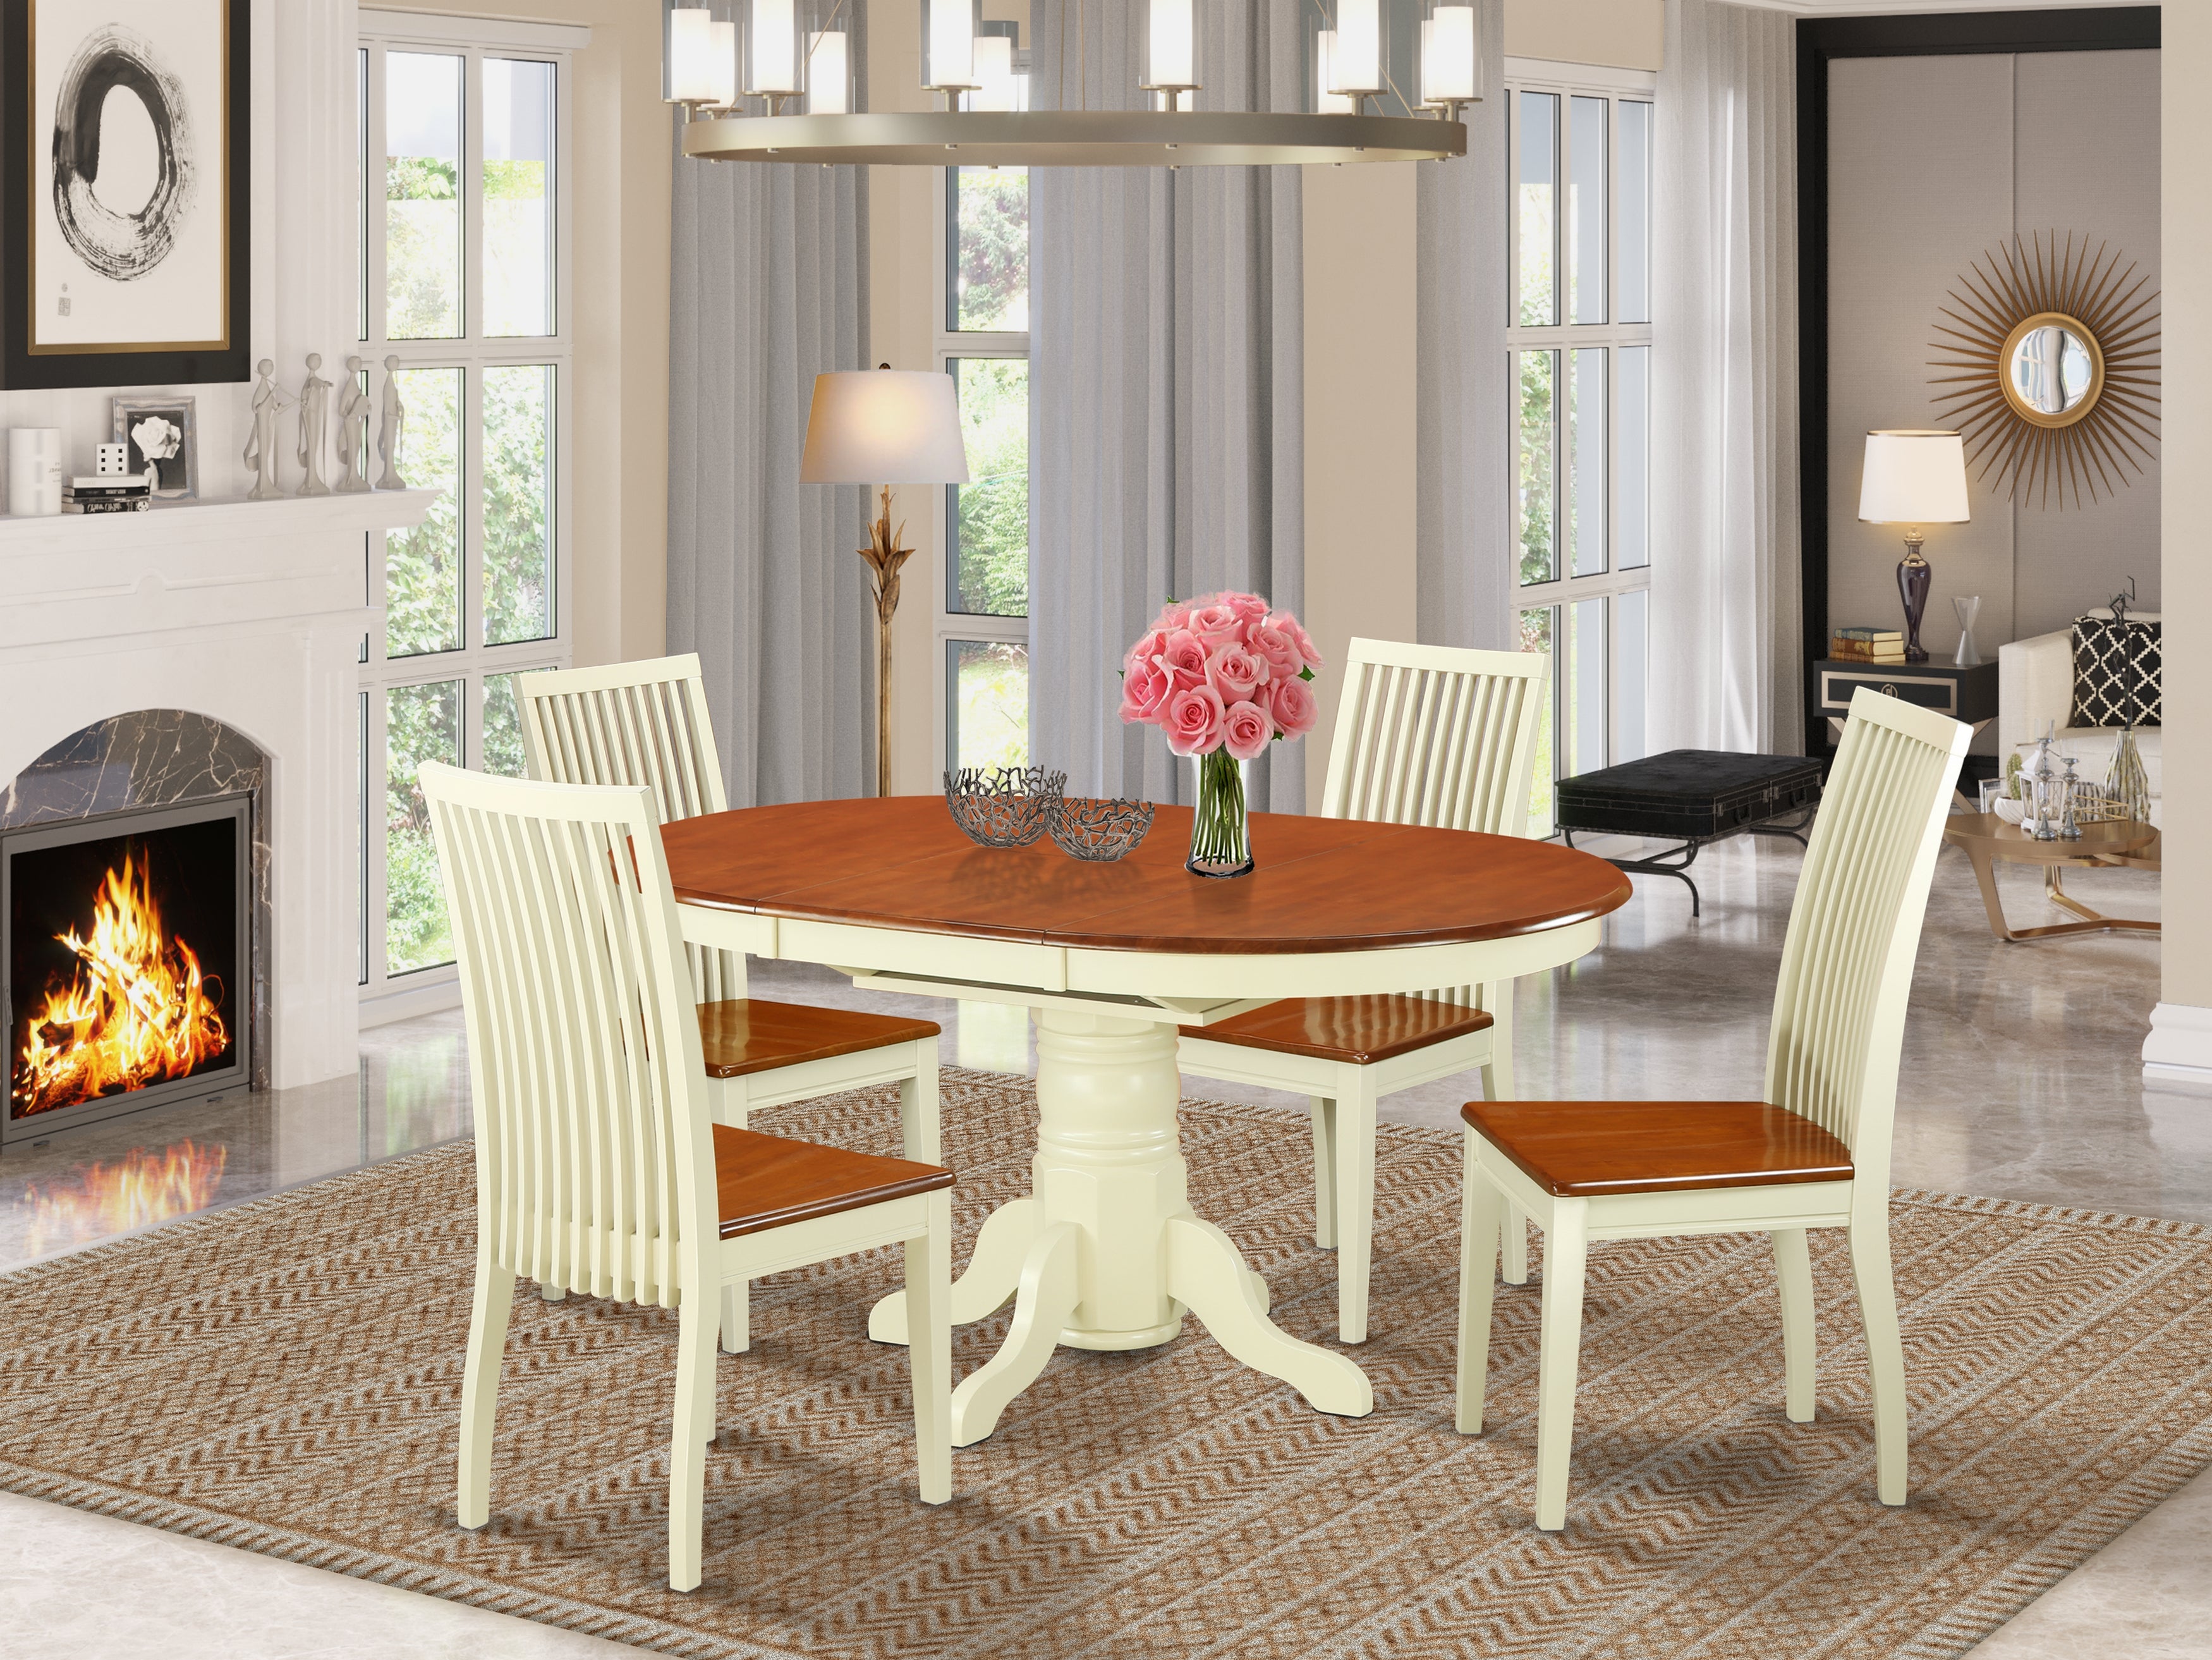 AVIP5-WHI-W 5 Pc Dining set with a Kitchen Table and 4 Wood Seat Kitchen Chairs in Buttermilk and Cherry